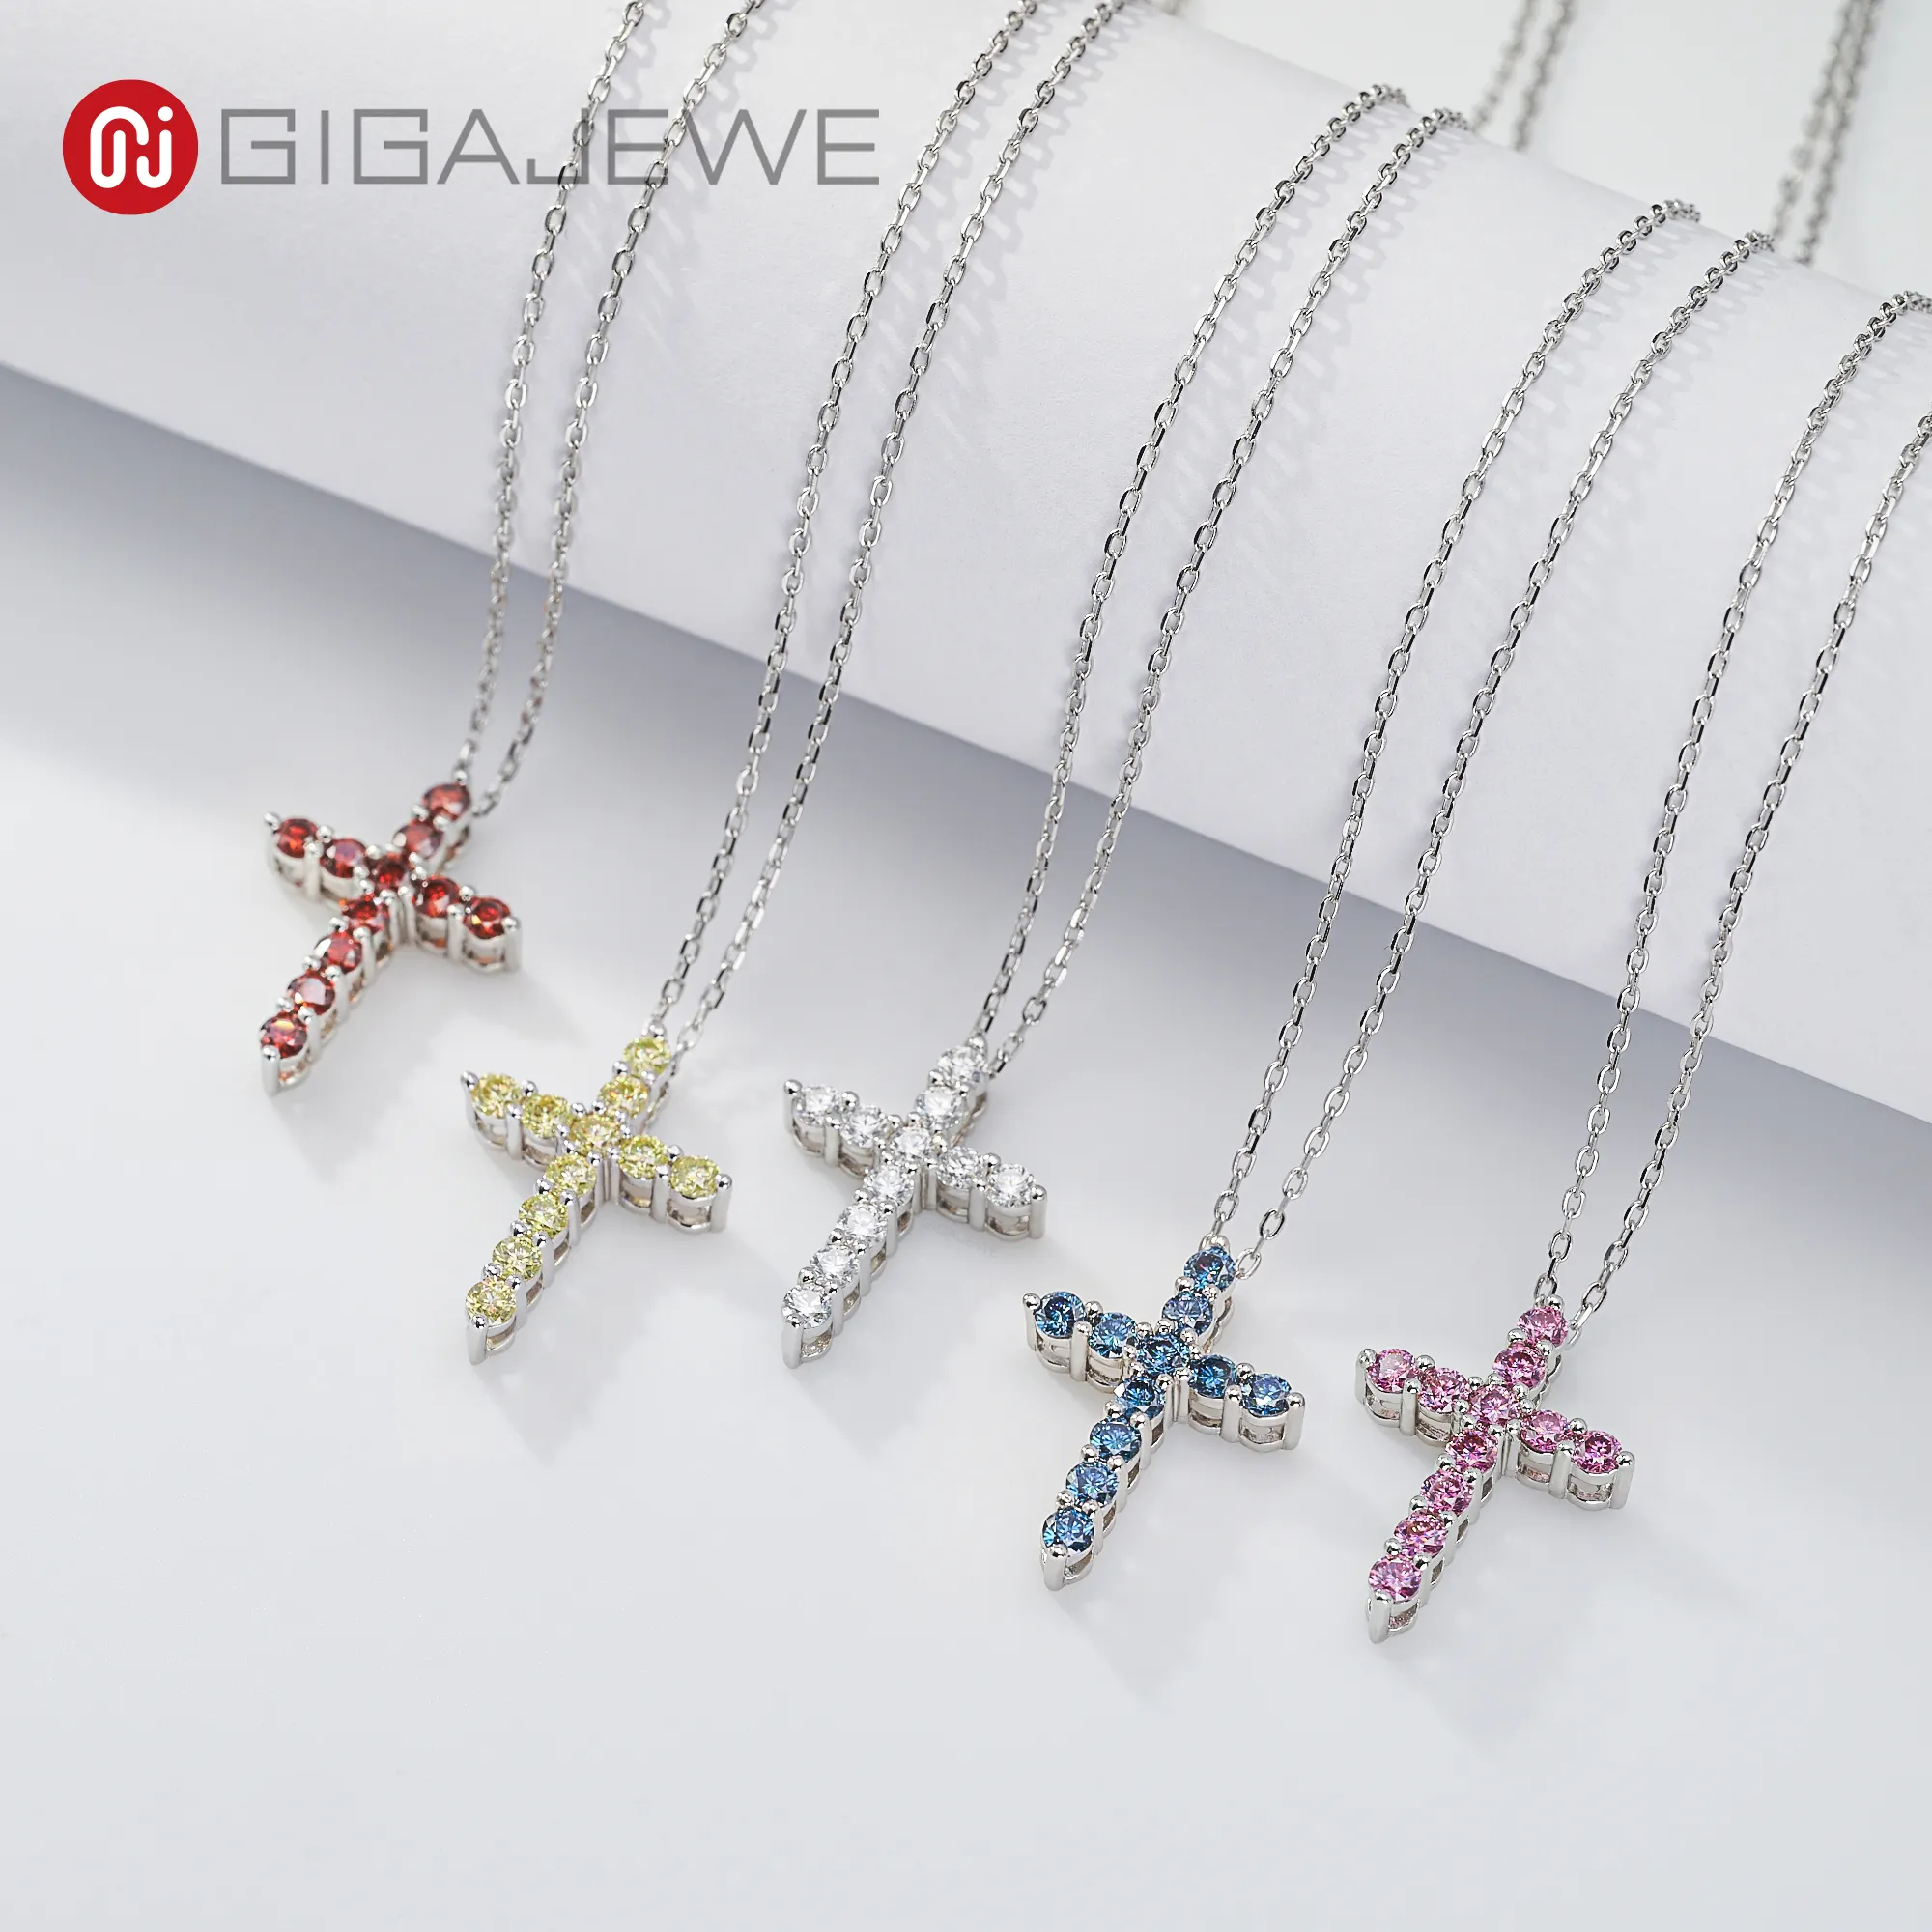 GIGAJEWE Cross Pendant 0.1ct*11 3mm white pink blue red yellow color 18K gold white Plated 925 Silver Moissanite Necklace